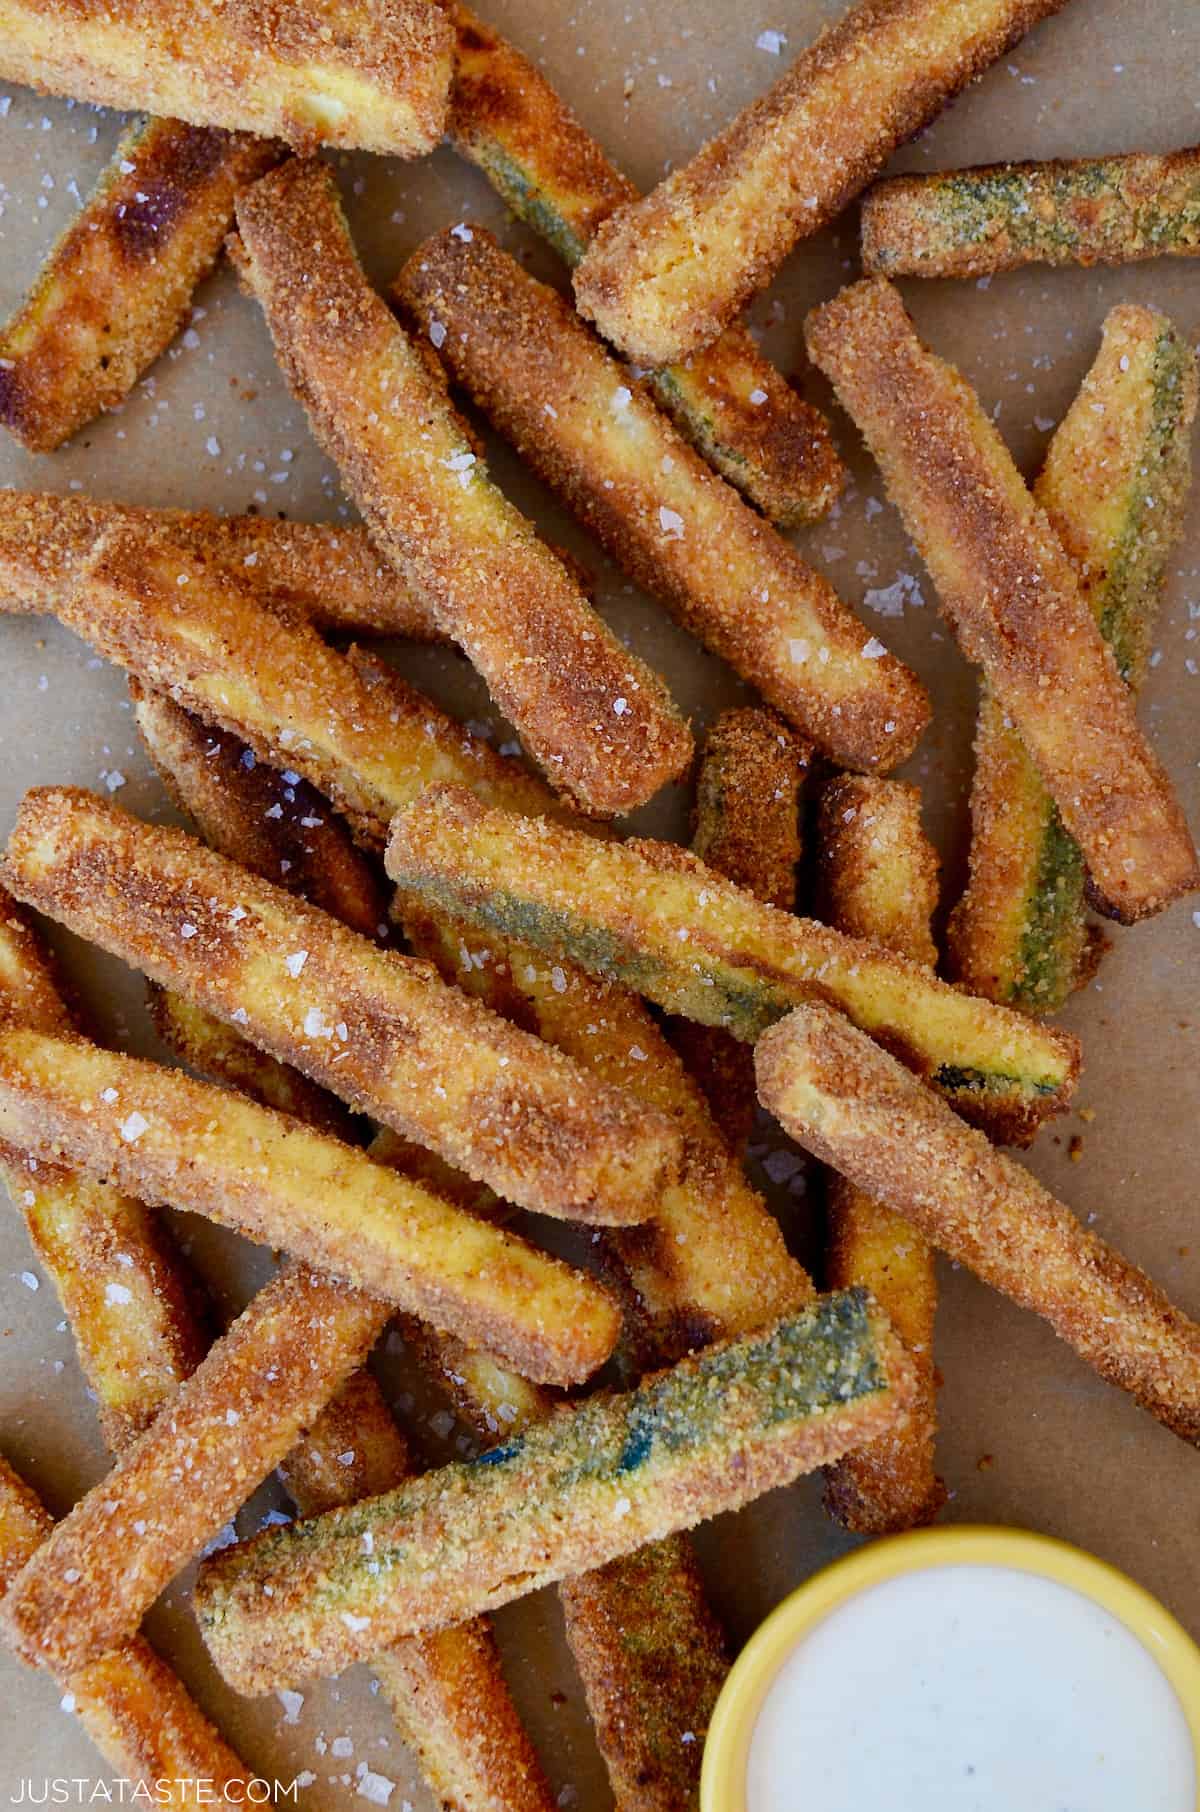 A pile of zucchini fries next to a bowl containing ranch dressing.